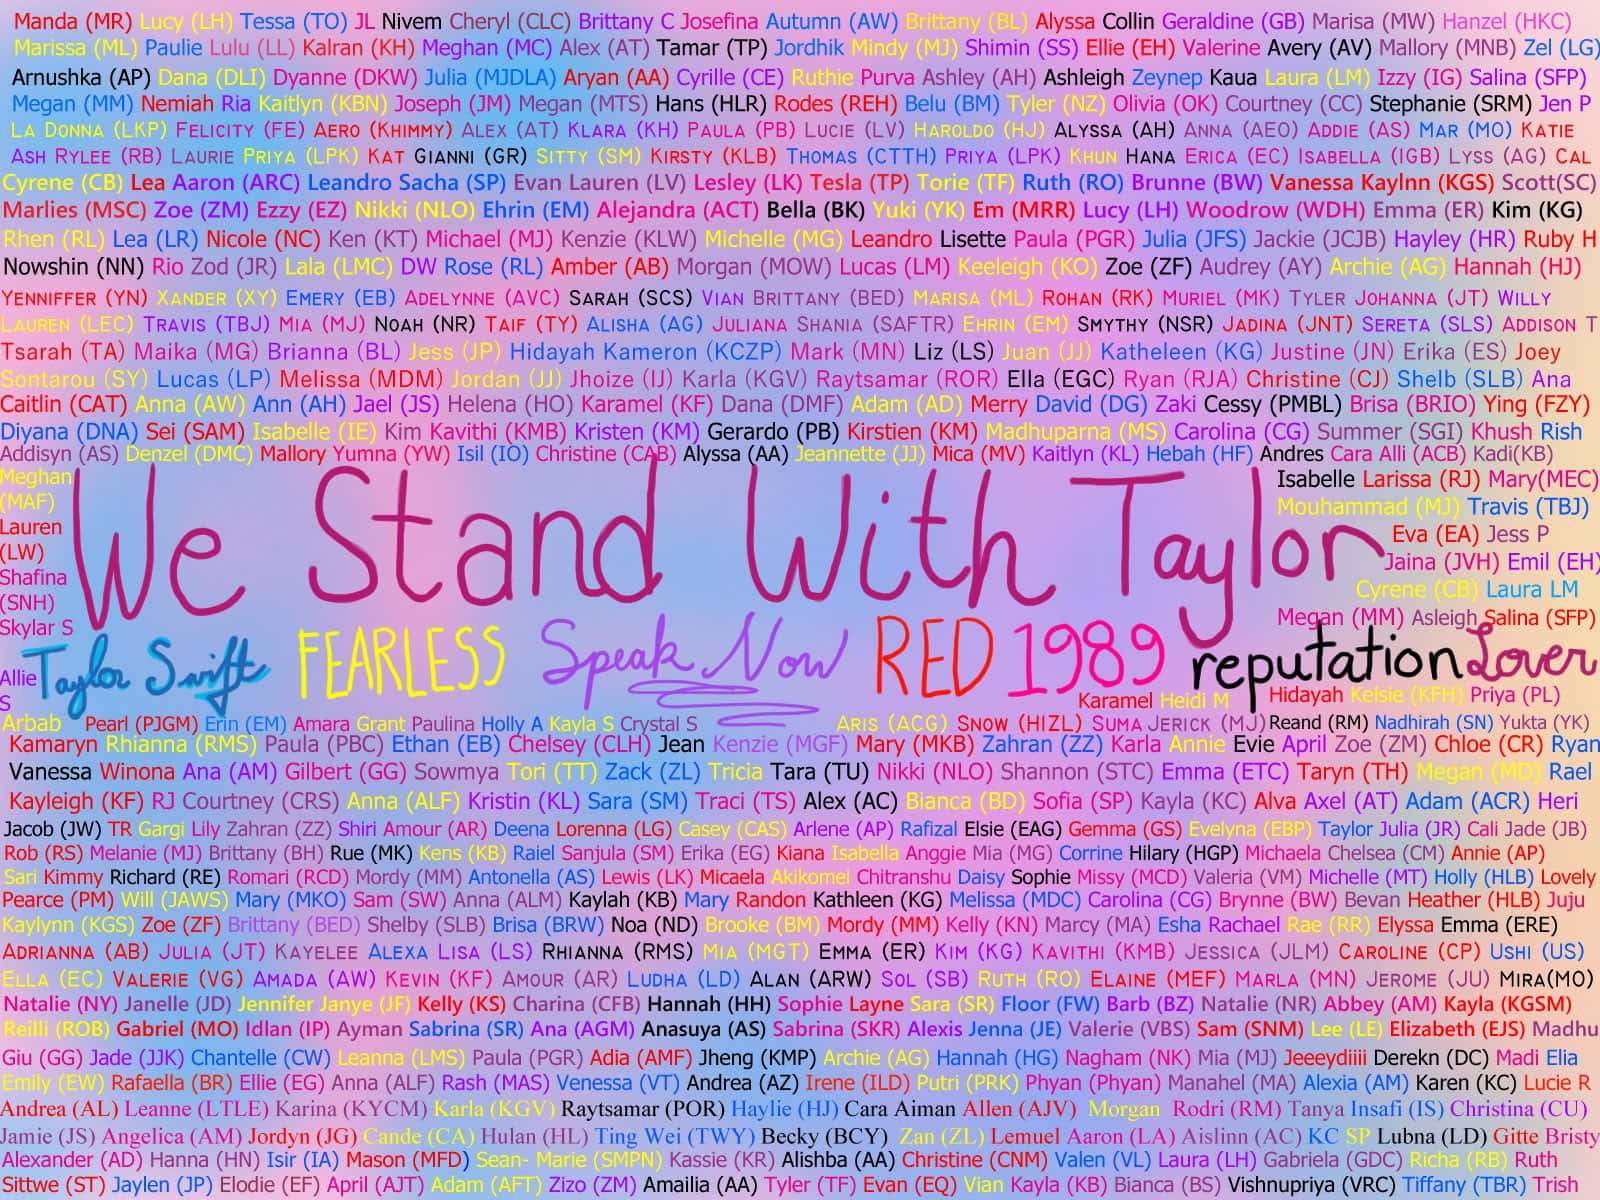 Taylor Swift Albumsand Fan Names Collage Wallpaper